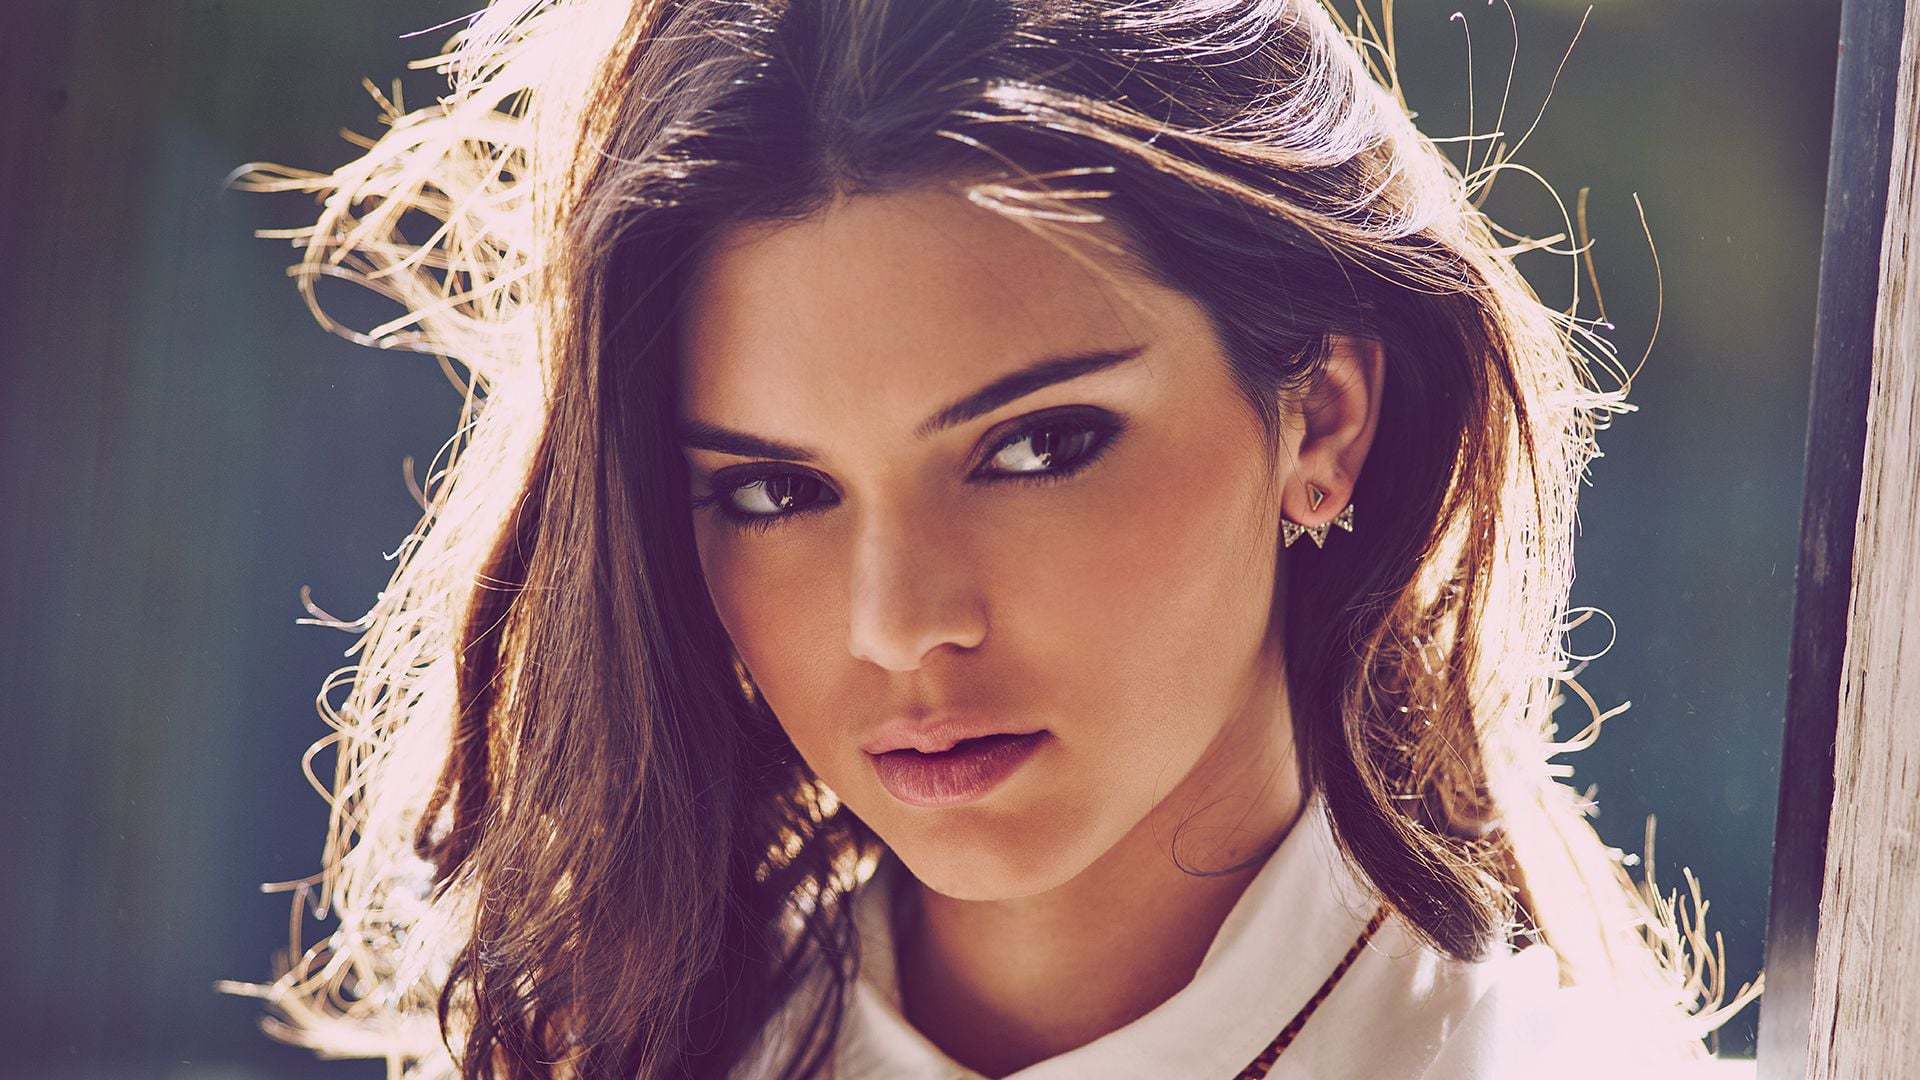 Kendall Jenner Wallpapers Images Photos Pictures Backgrounds